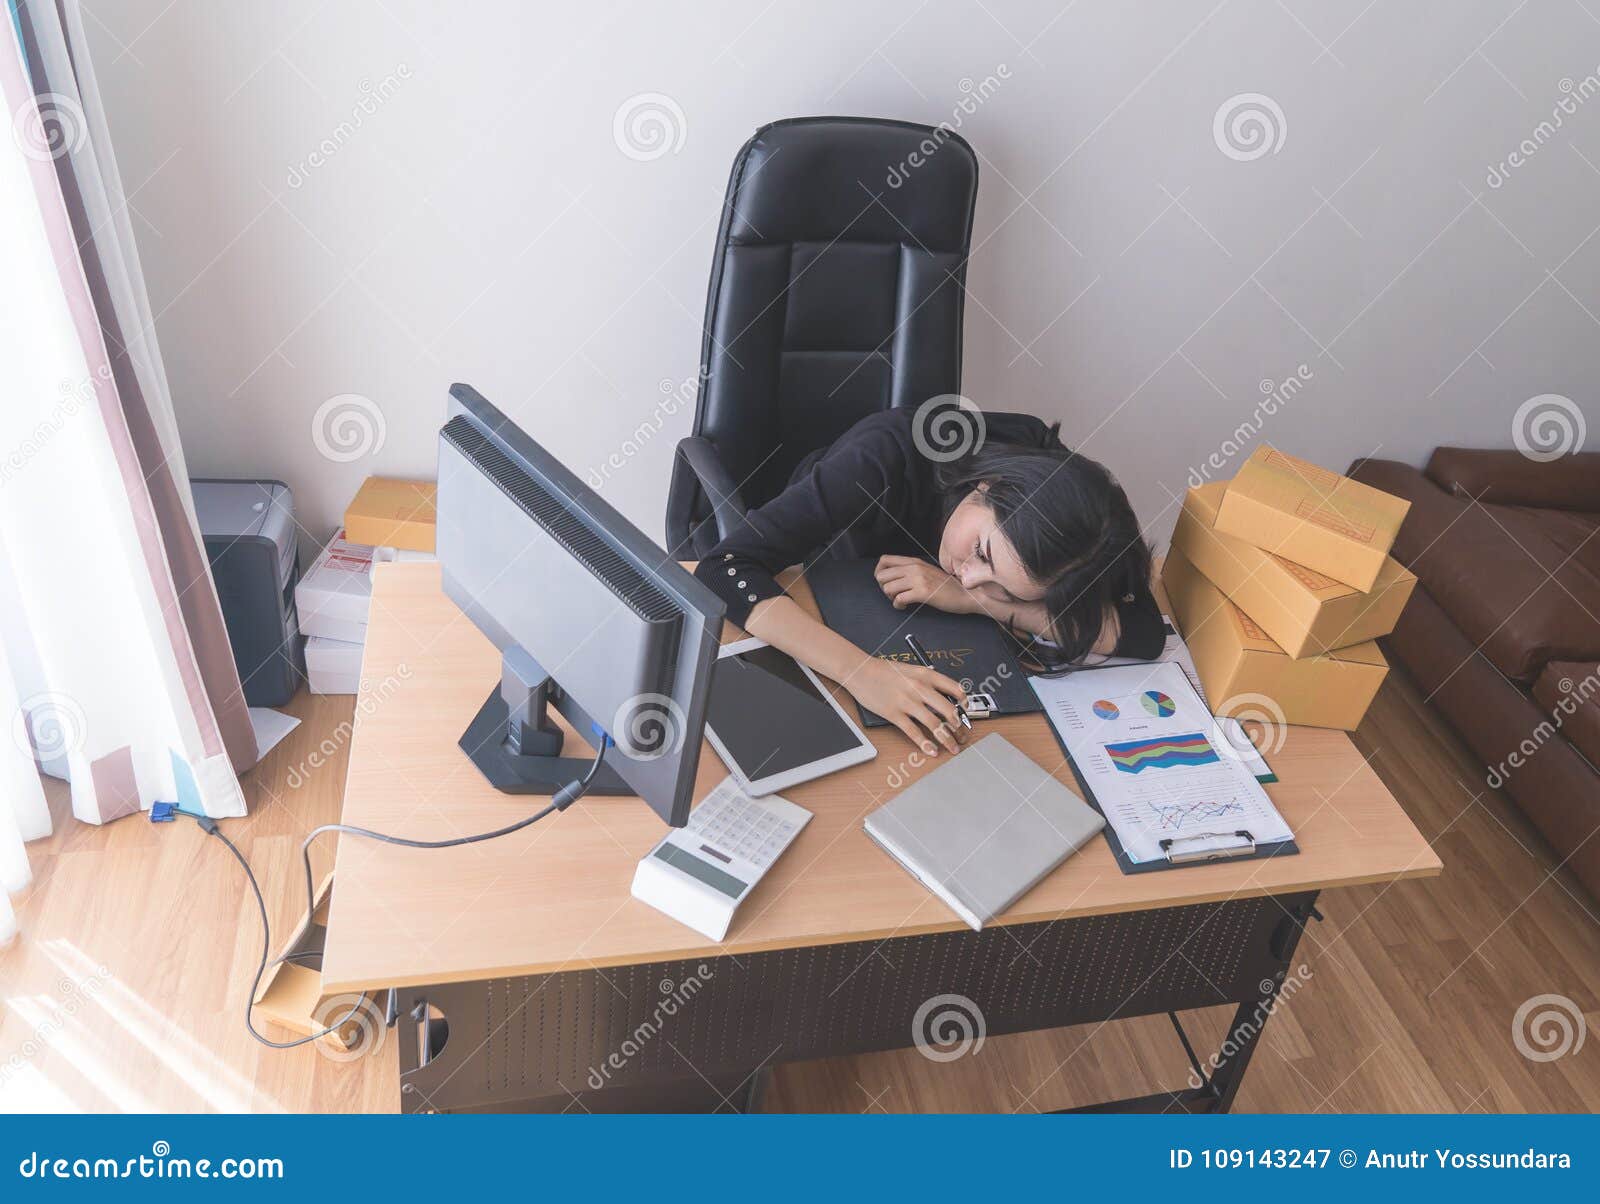 Tired Sleepy Female Office Worker Is Sleeping With A Lot Of Work